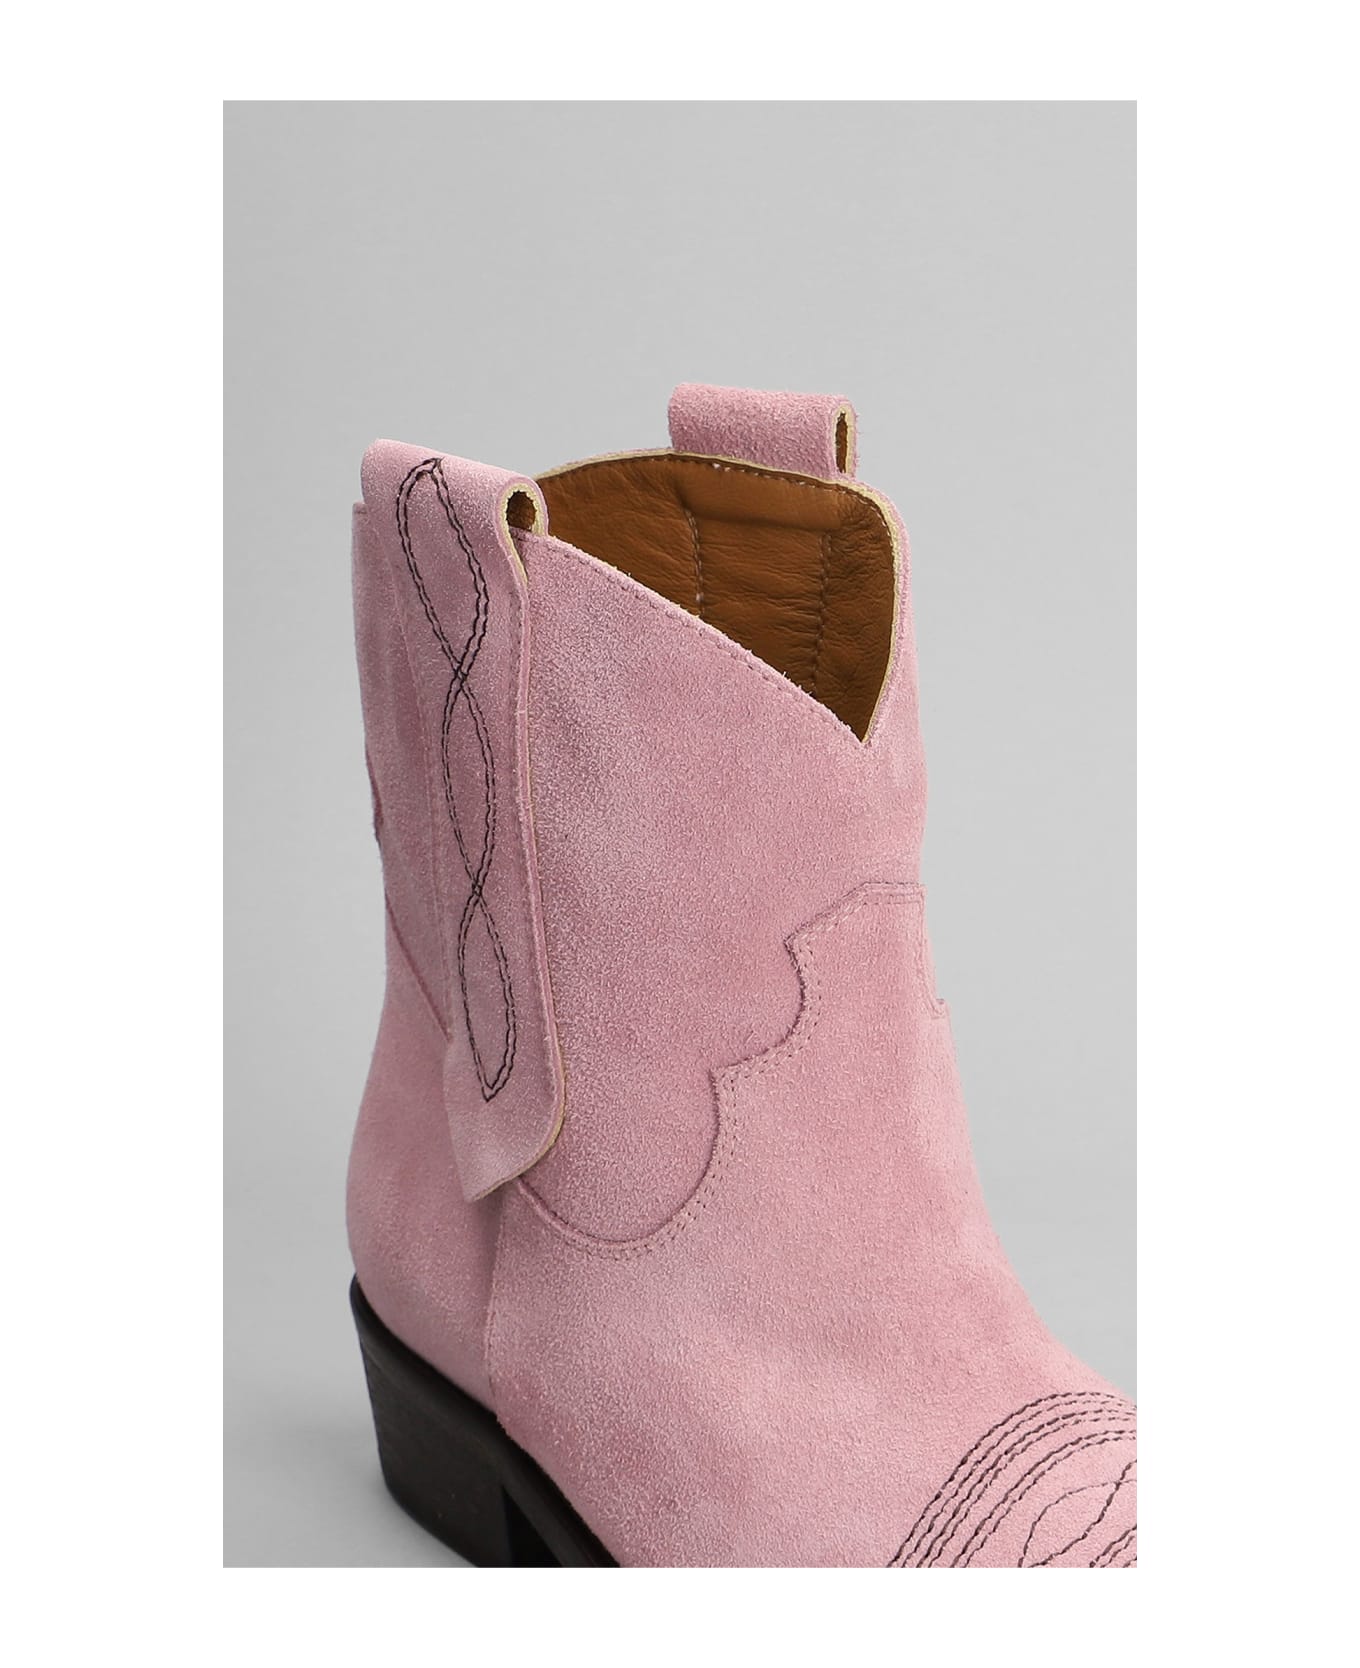 Via Roma 15 Texan Ankle Boots In Rose-pink Suede - rose-pink ブーツ